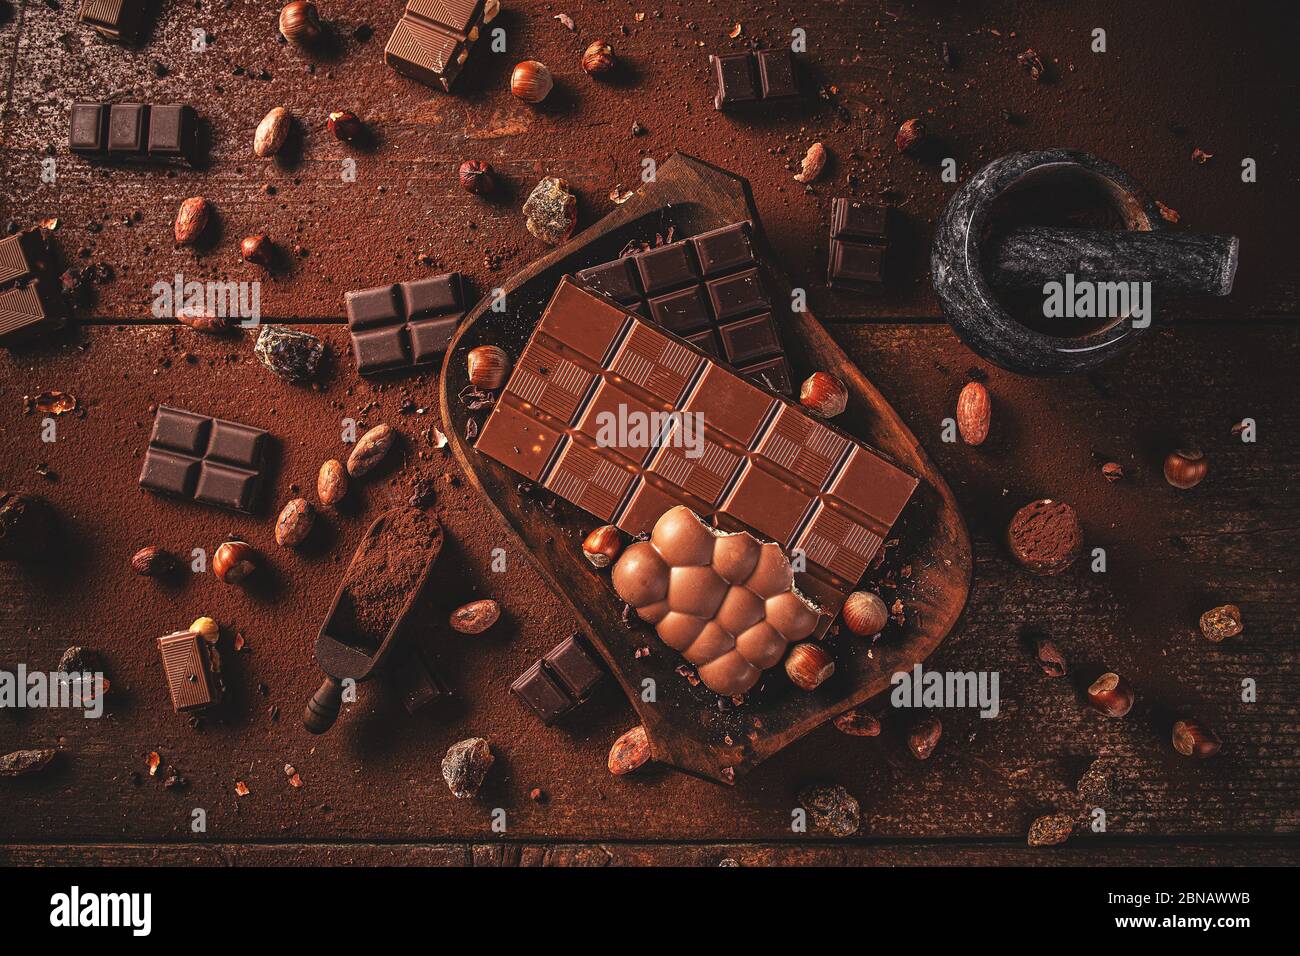 Flat lay of dark chocolate chunks and beans on wooden table Stock Photo